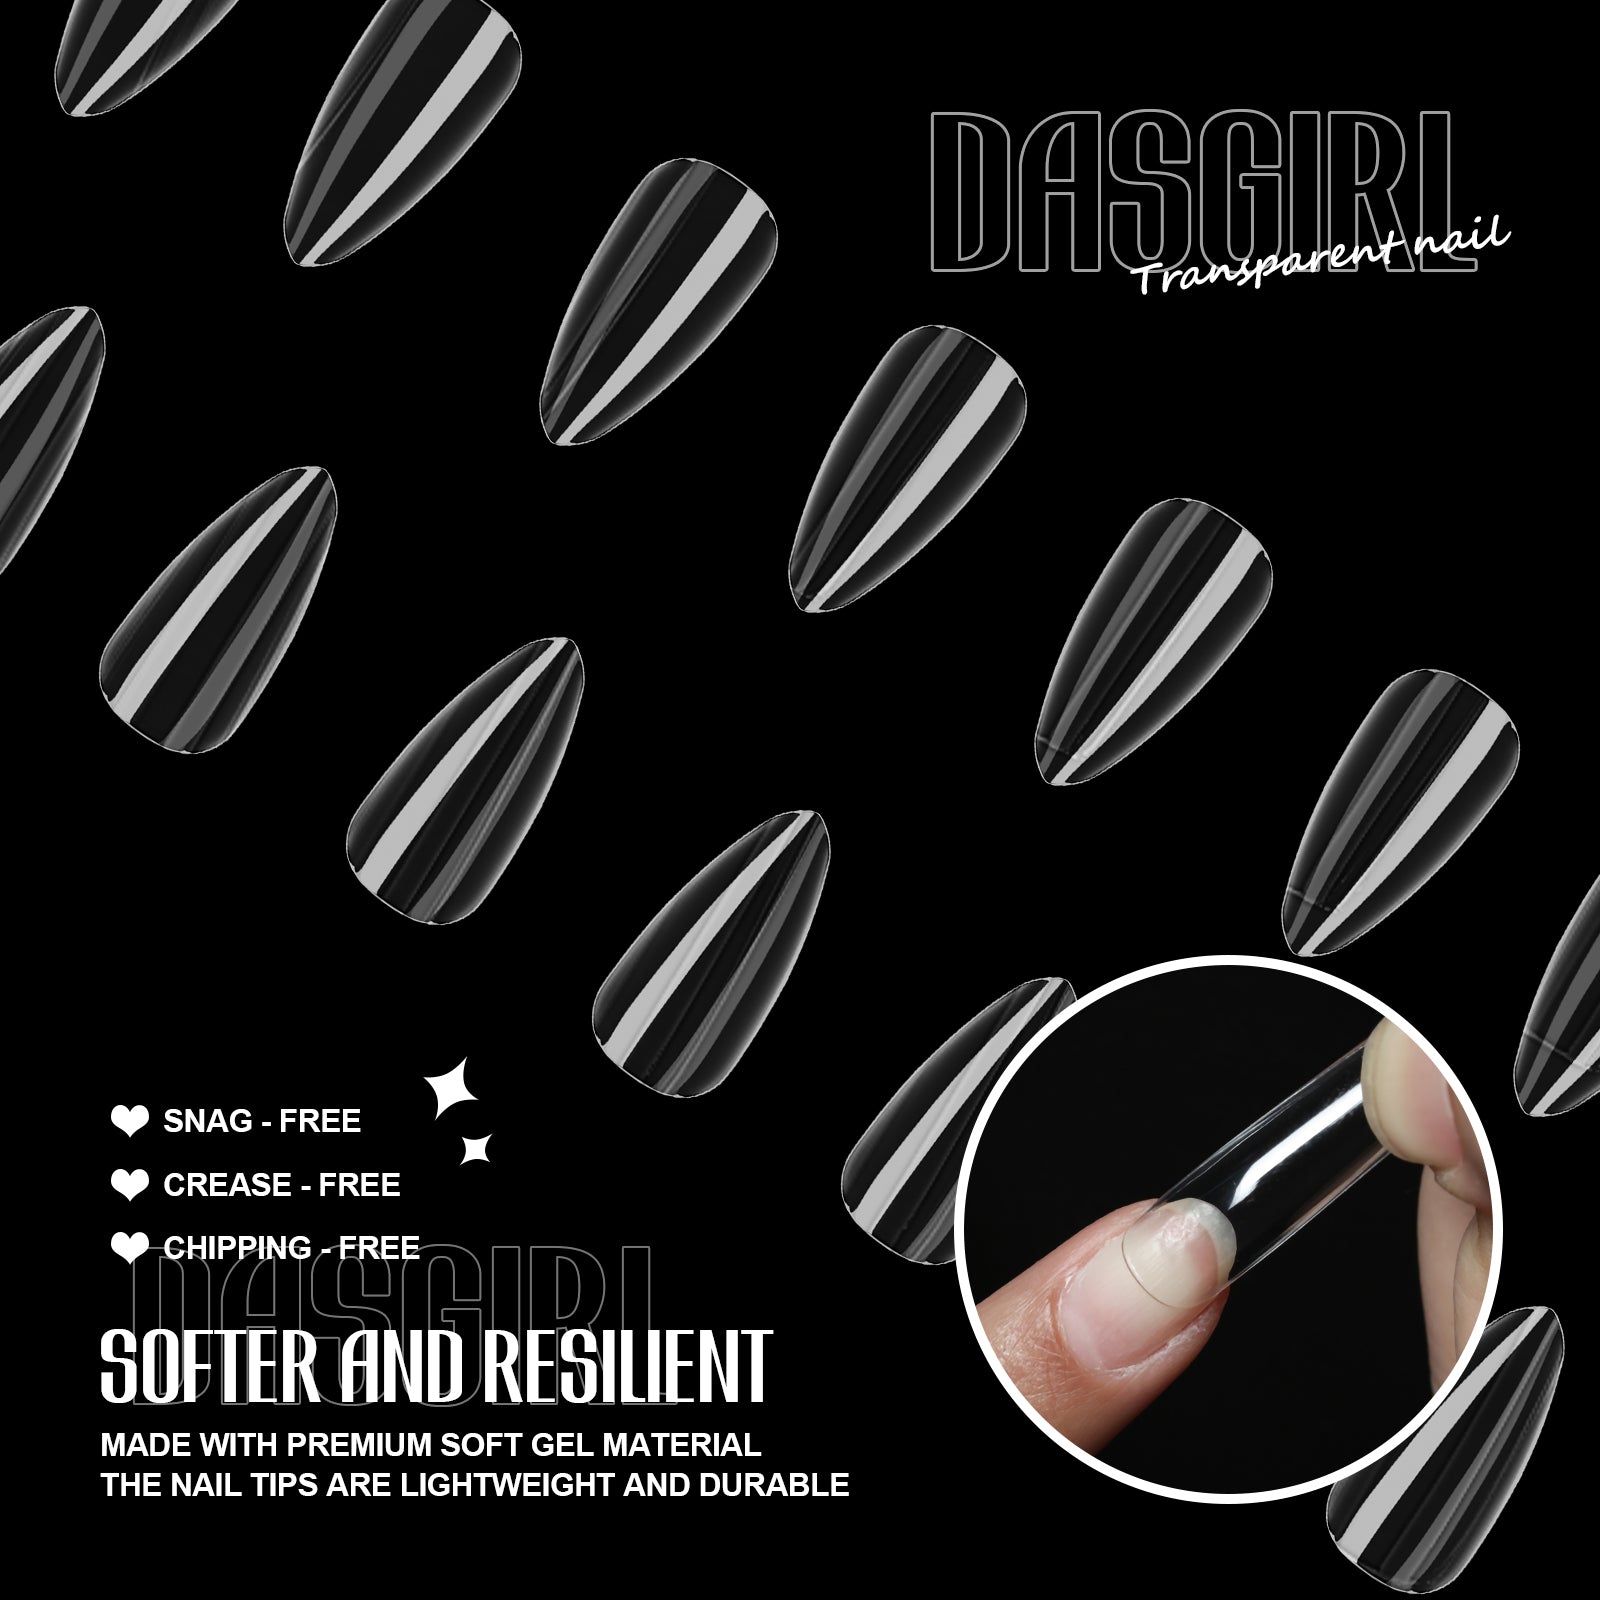 Extra Short Coffin Nail Tips 450PCS Full Cover Soft Gel Clear Nail Tips  Double-S - SellersHub.io